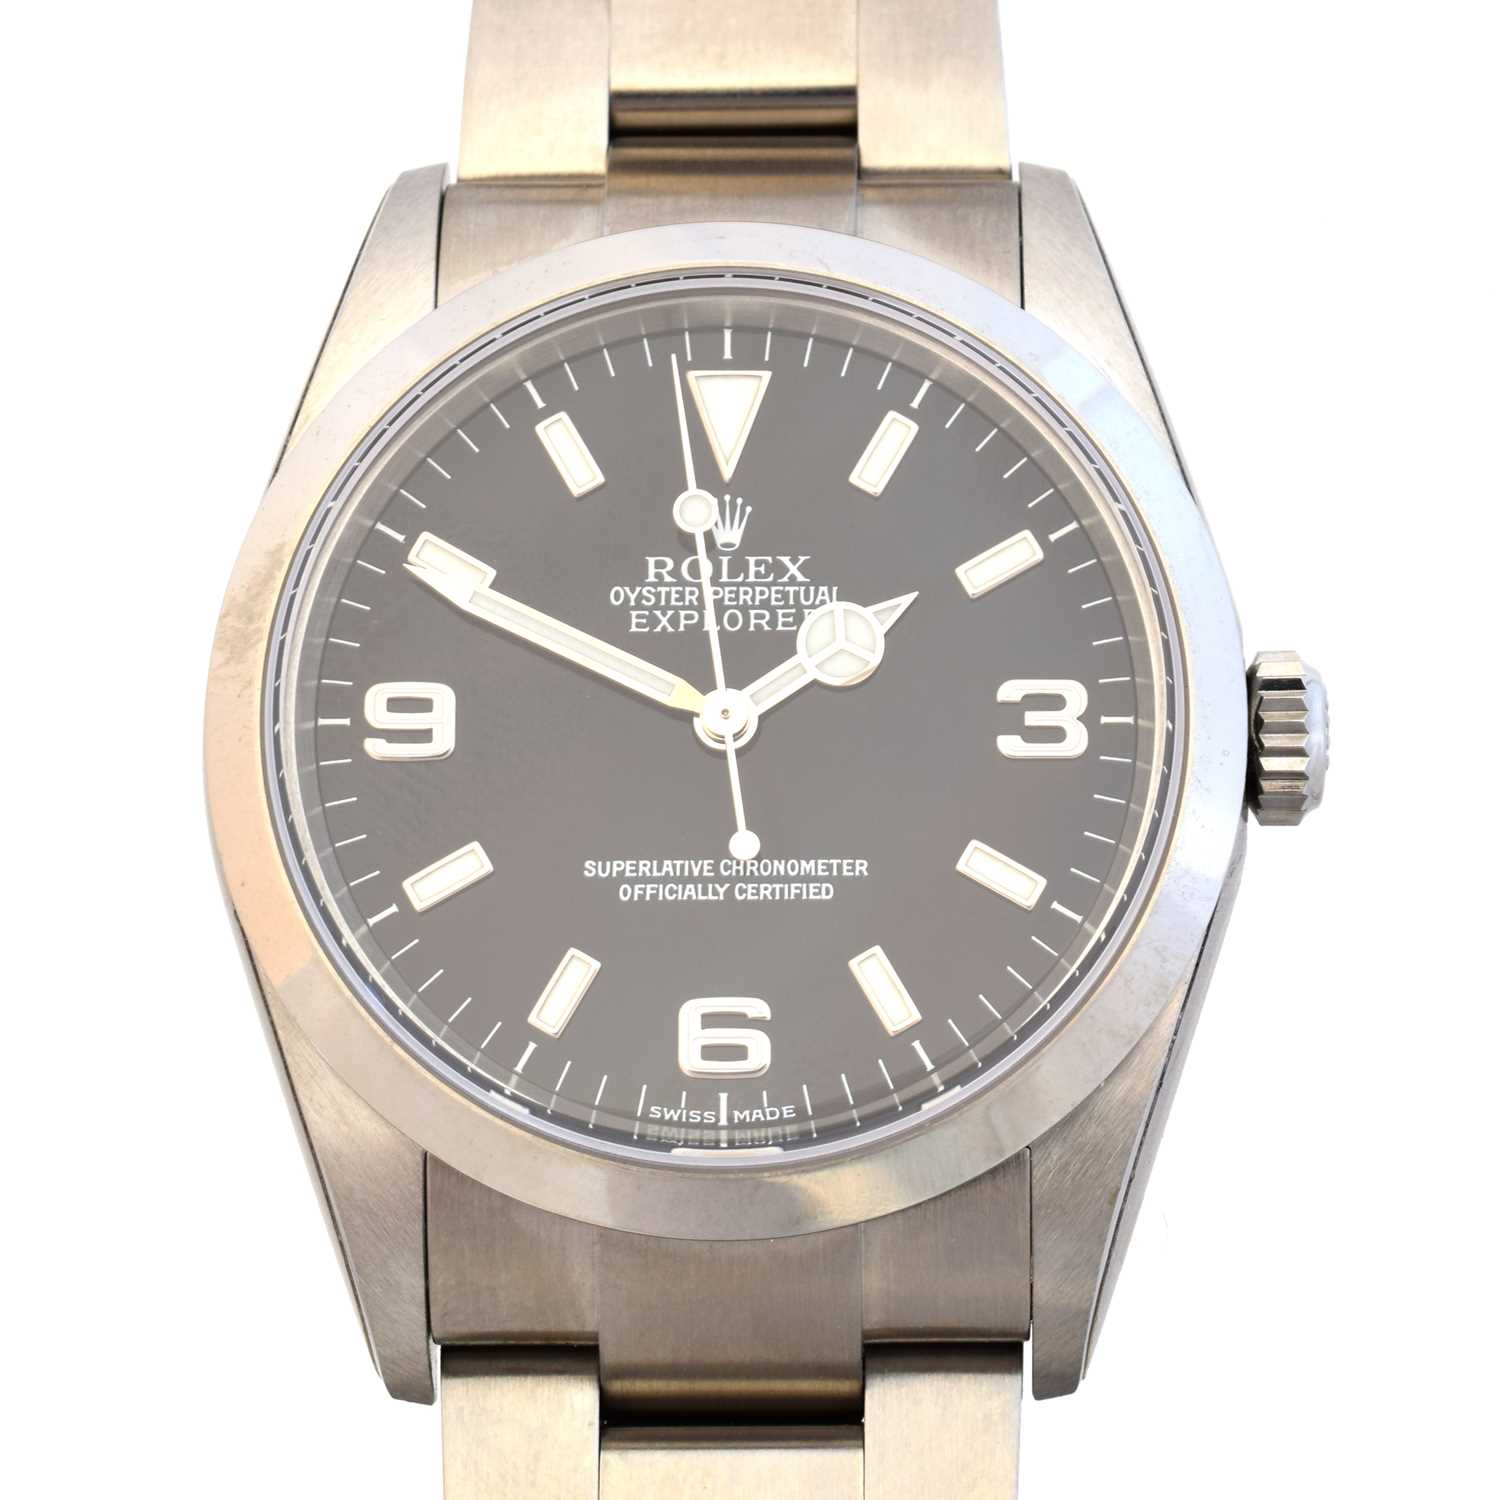 Lot A stainless steel Rolex Oyster Perpetual Explorer watch